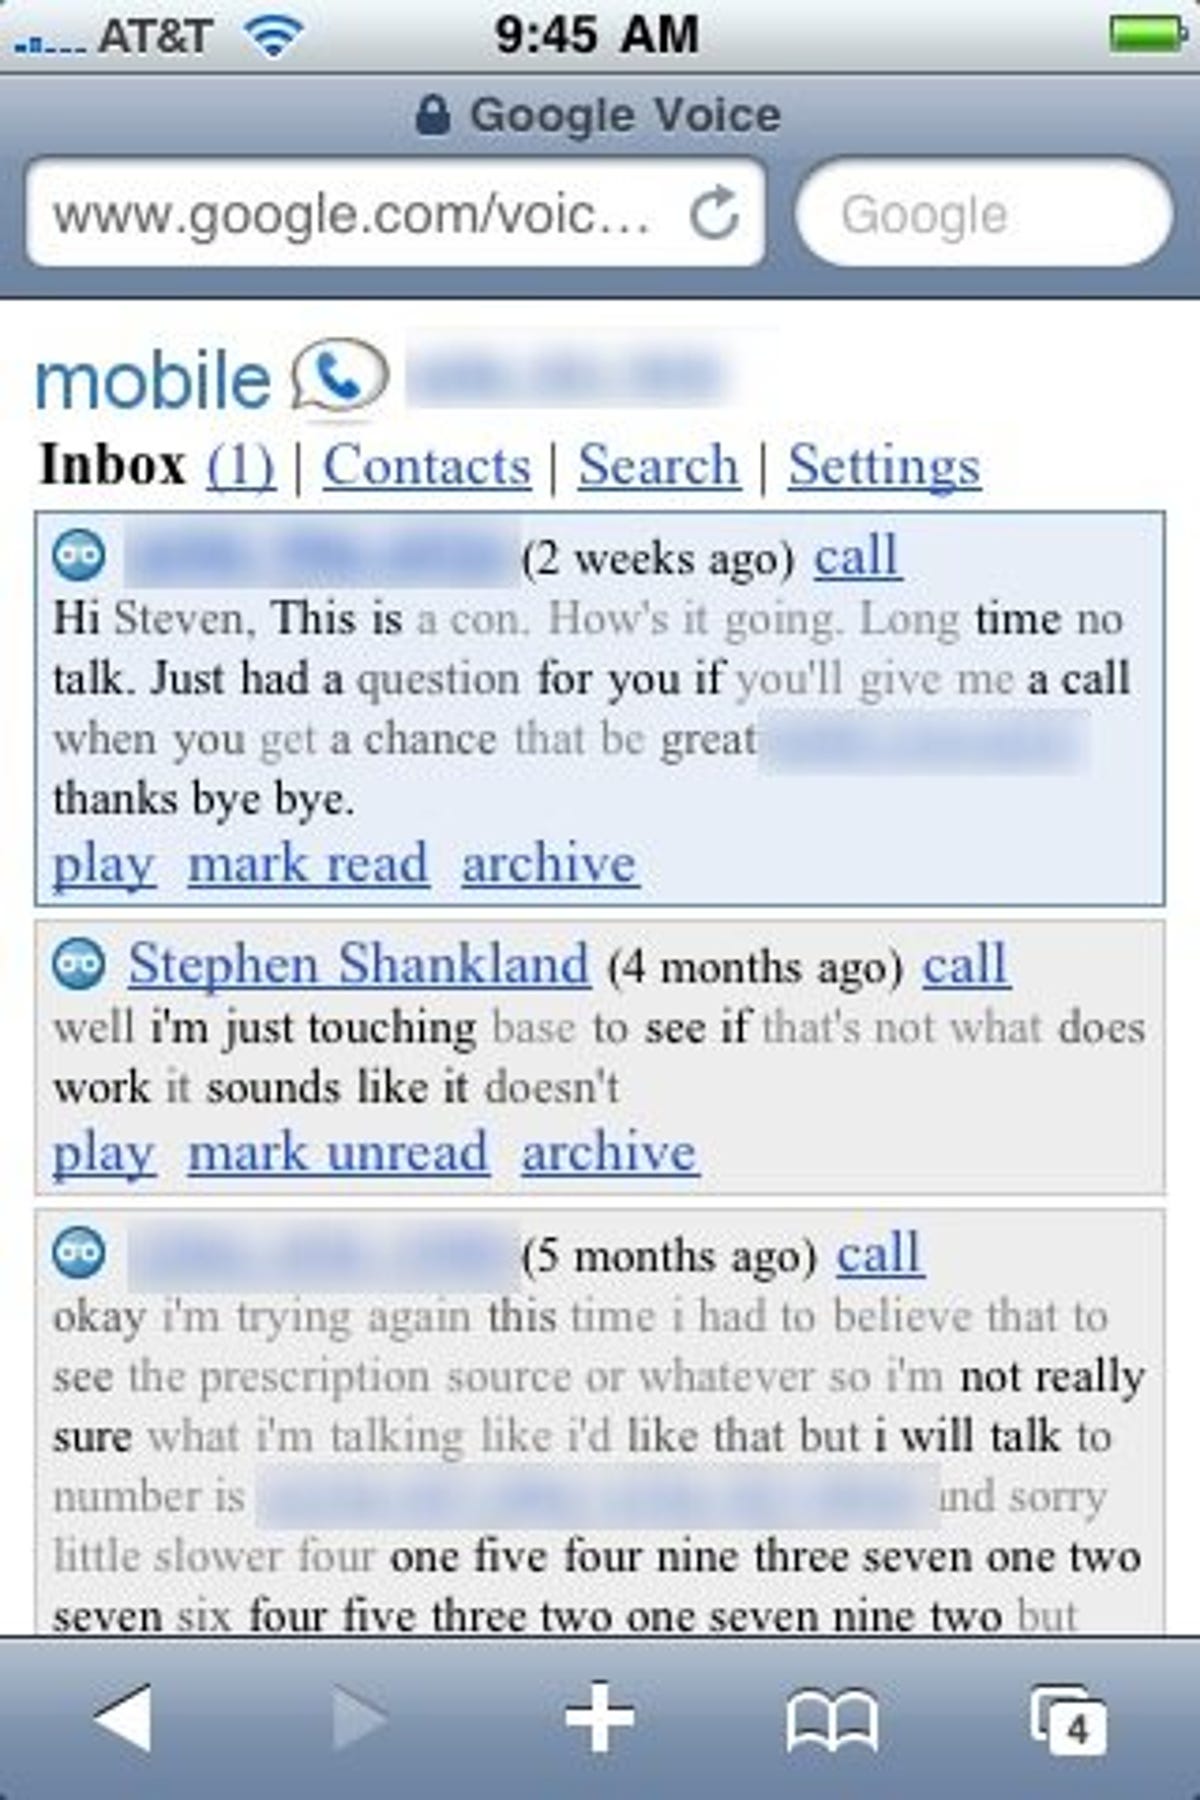 Google Voice's Web-based iPhone interface.